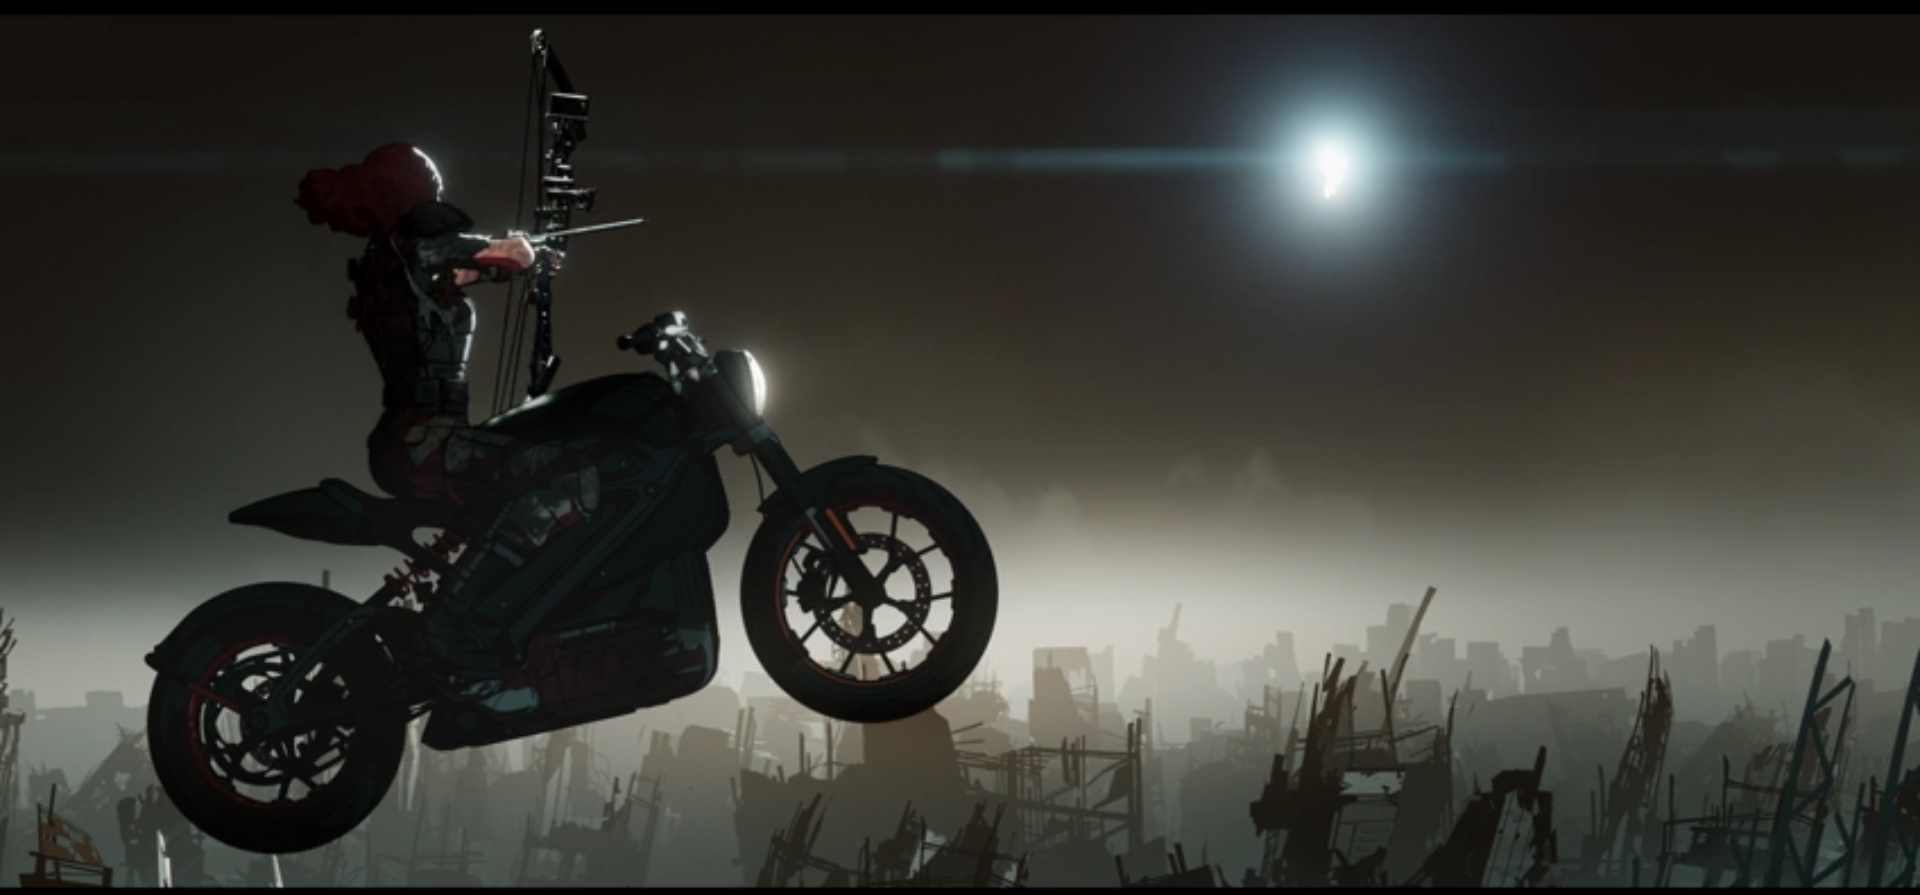 Nat on a motorbike jumping through the air, aiming a bow at a bright energy source that is Ultron far away